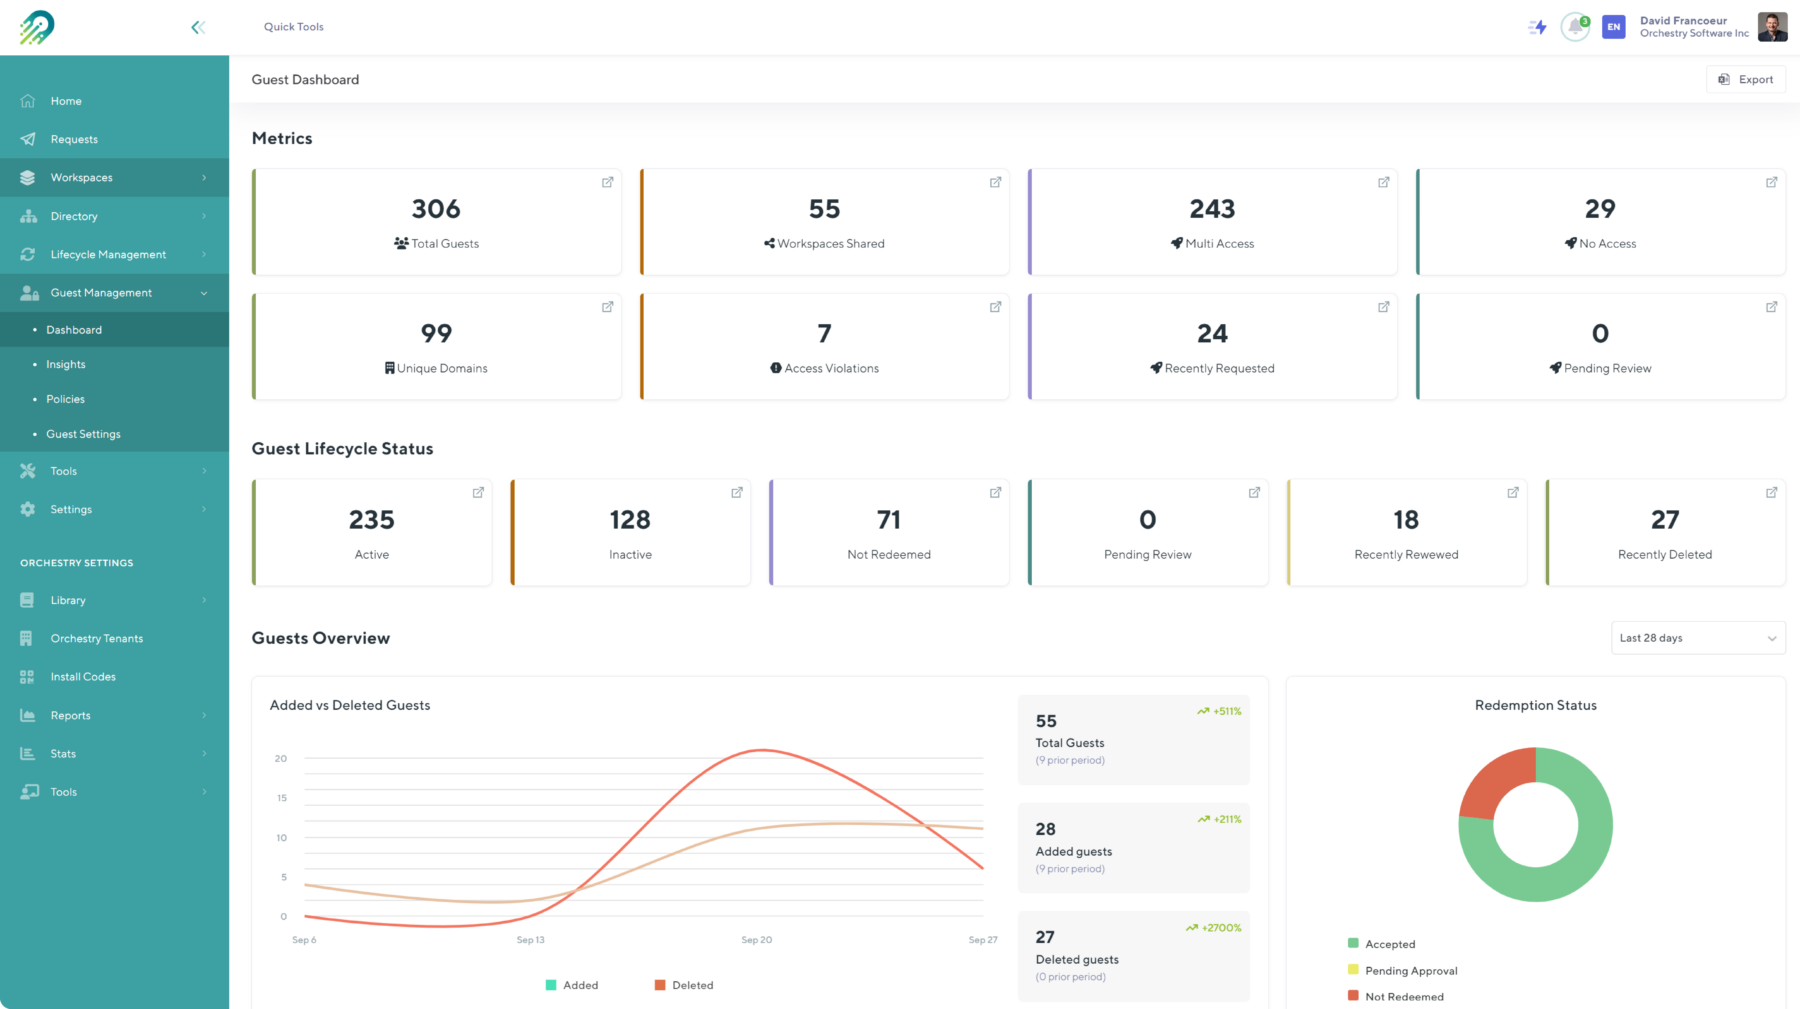 Orchestry's Microsoft Teams Guest insights dashboard